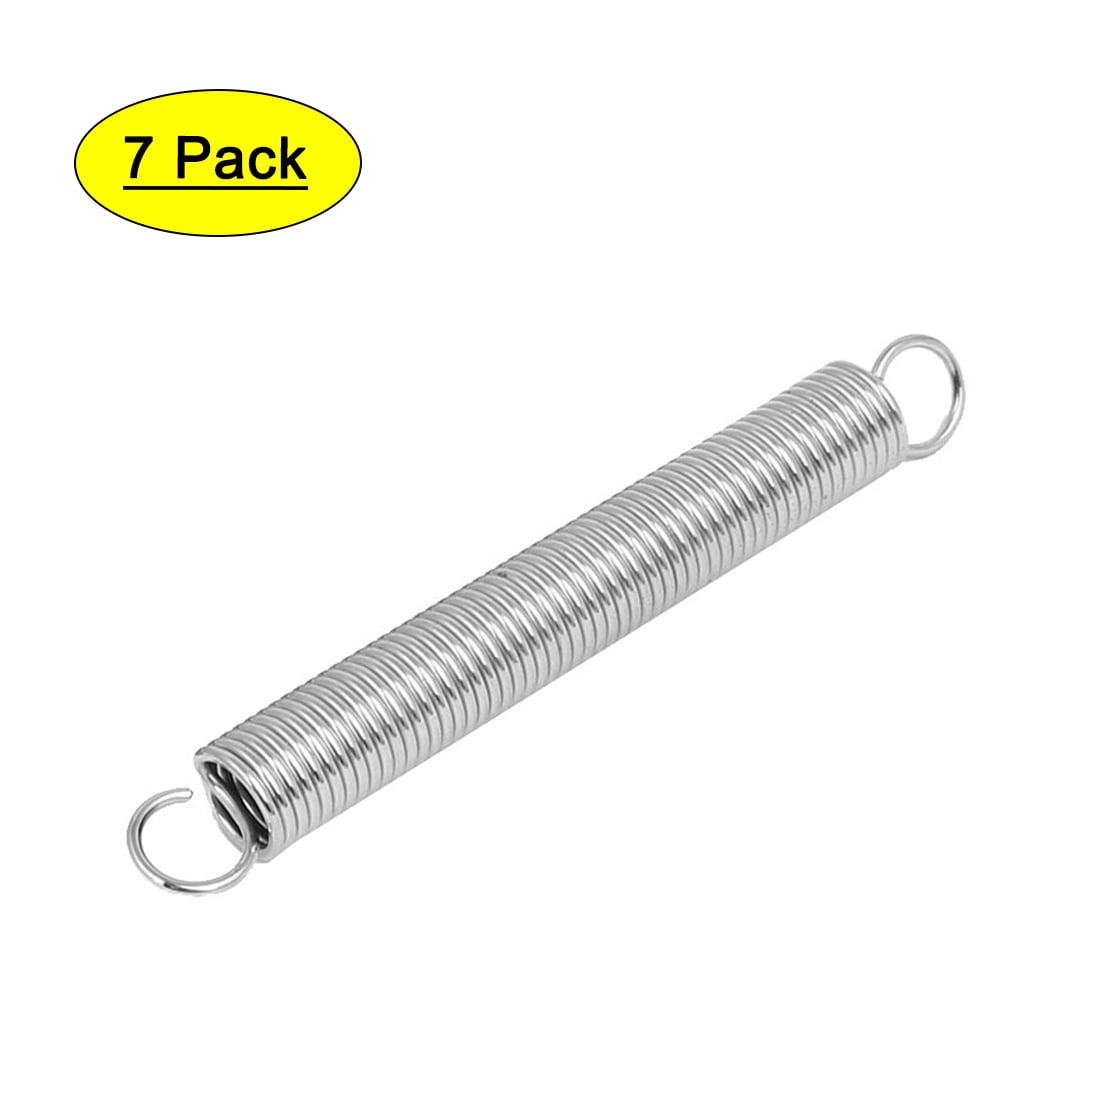 Houseuse 67mmx10mmx1.1mm Stainless Steel Dual Hook Tension Spring Silver Tone 7pcs